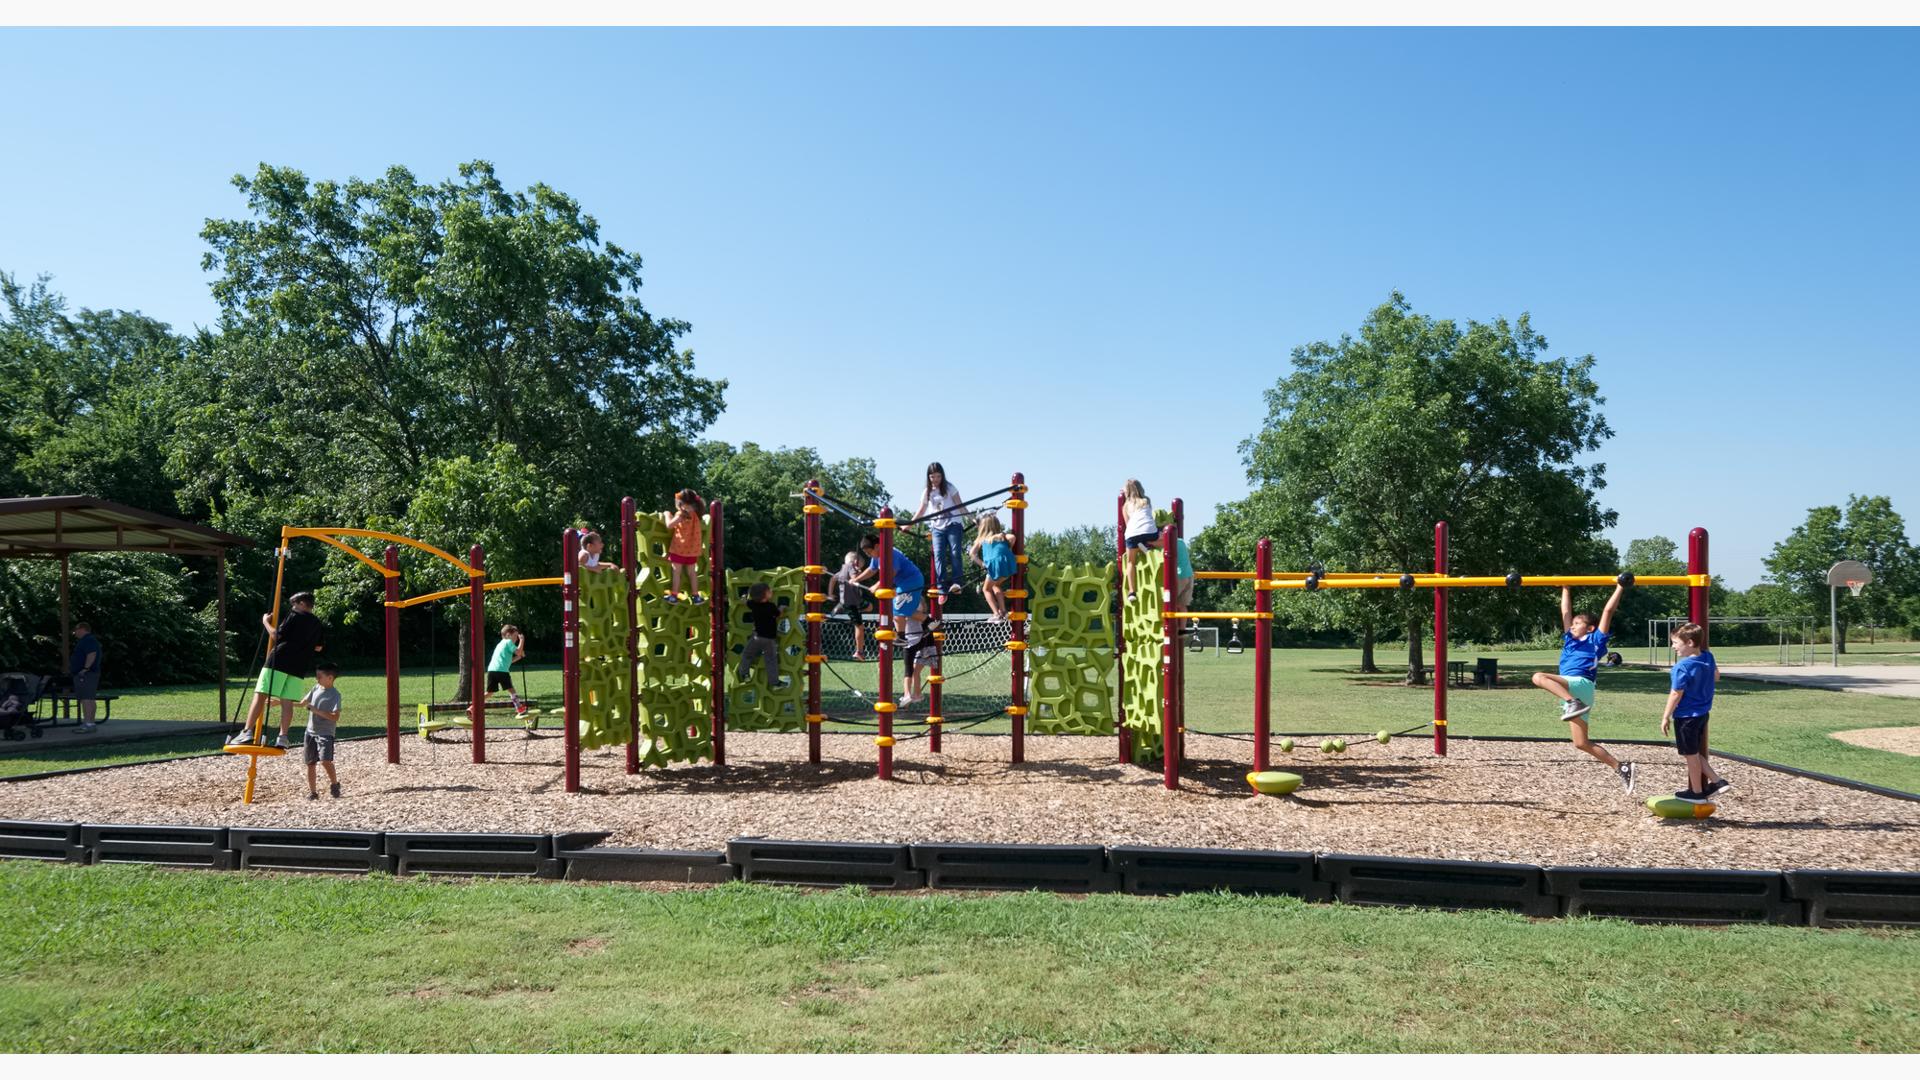 School-aged kids play on their school playground with green geometric shaped-like climbers. Playground also includes monkey bars, spinner and tight-rope play event. 